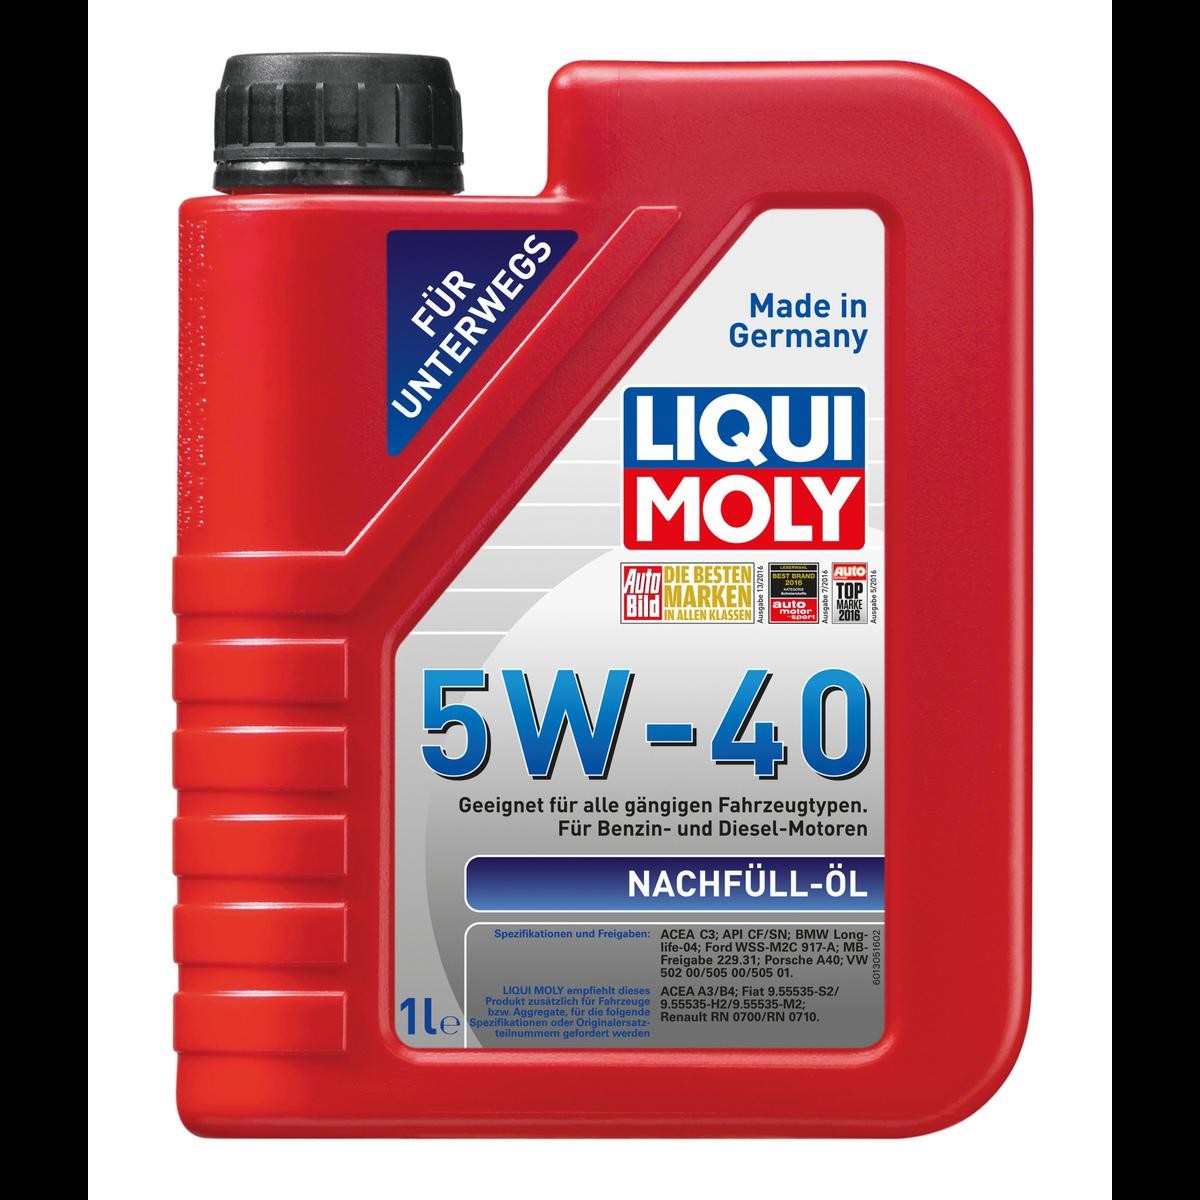 Engine oil LIQUI MOLY 5W-40, 1l, Synthetic Oil longlife 1305